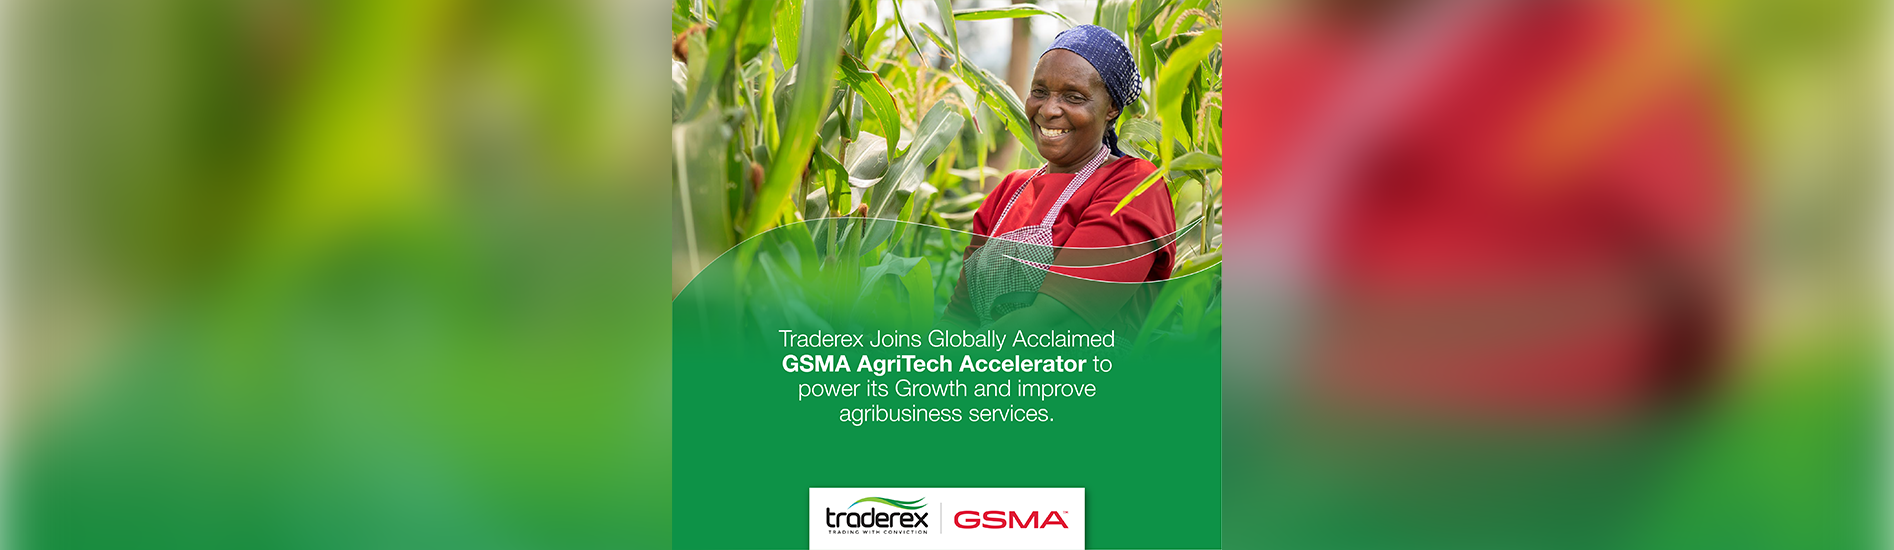 Traderex Selected for Globally Acclaimed GSMA AgriTech Accelerator